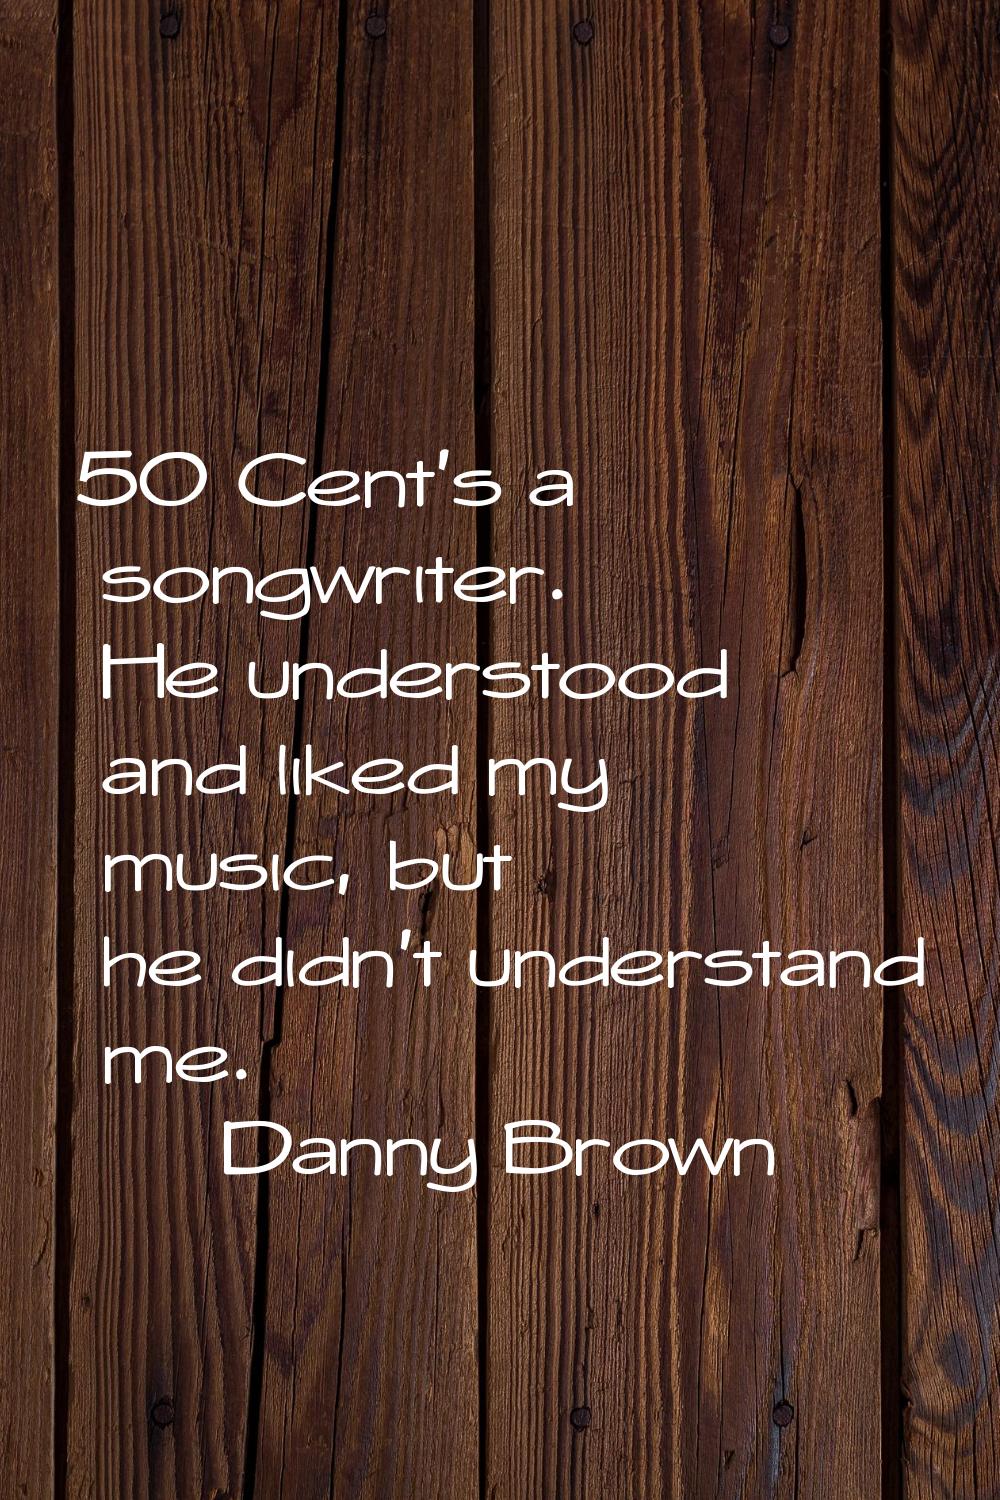 50 Cent's a songwriter. He understood and liked my music, but he didn't understand me.